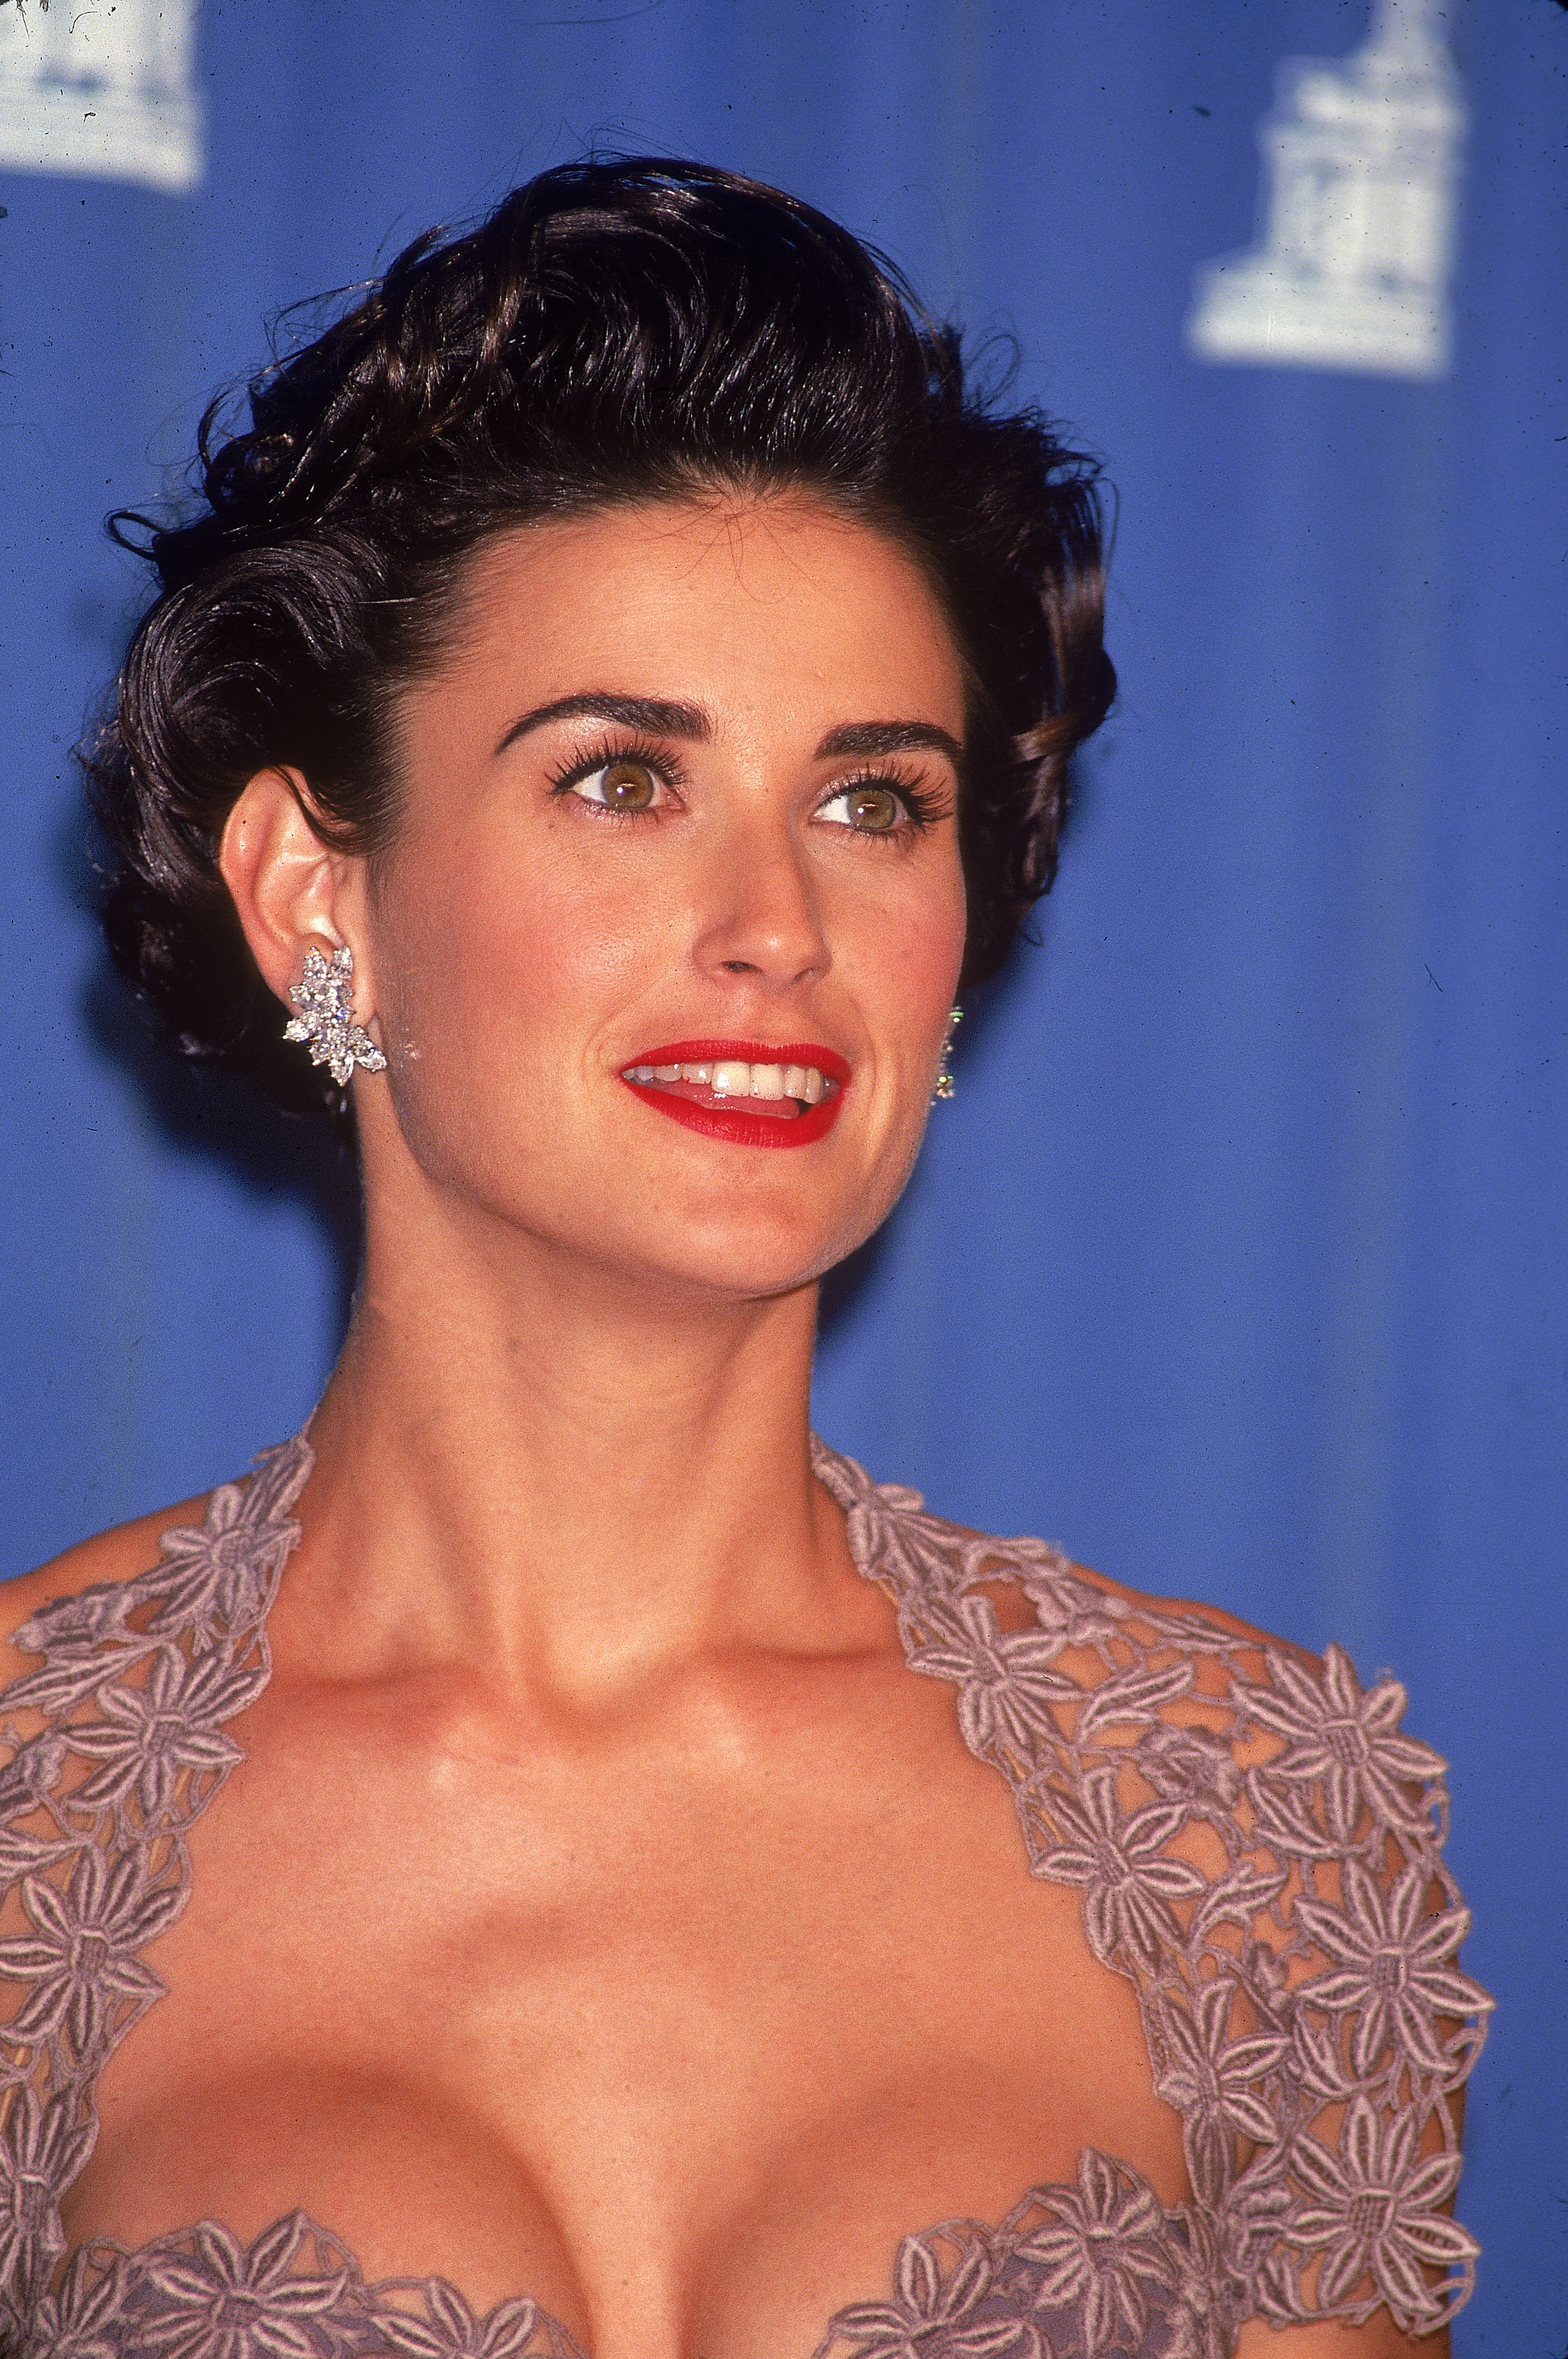 Demi Moore during an award ceremony, circa 1990s. | Source: Getty Images